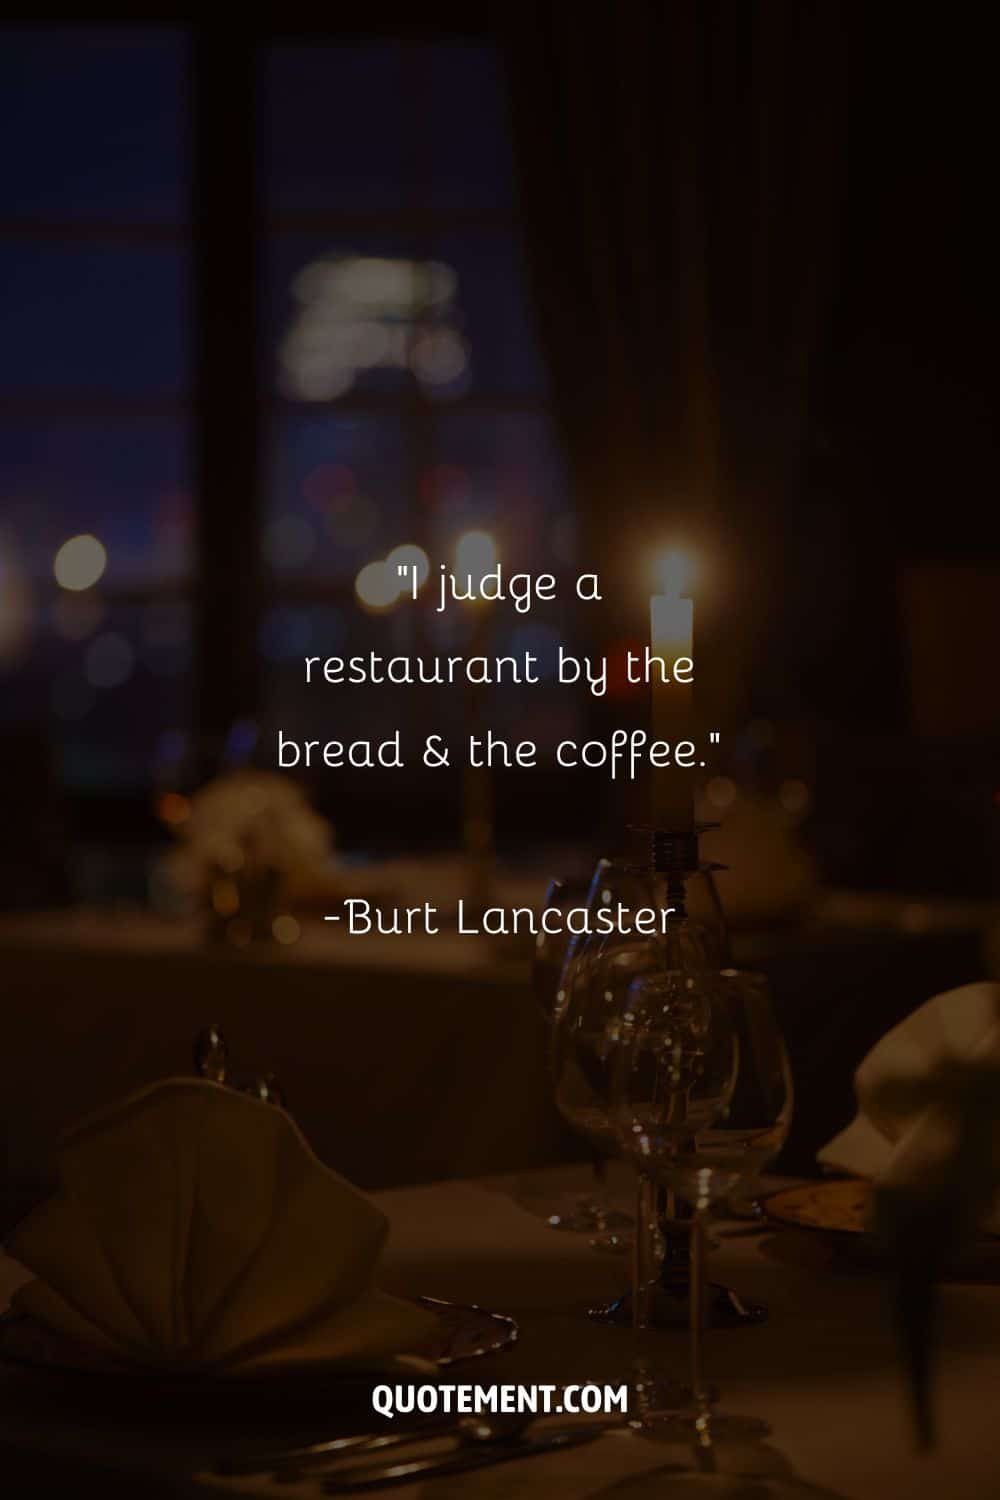 Image of an elegant table setting representing a quote about restaurants